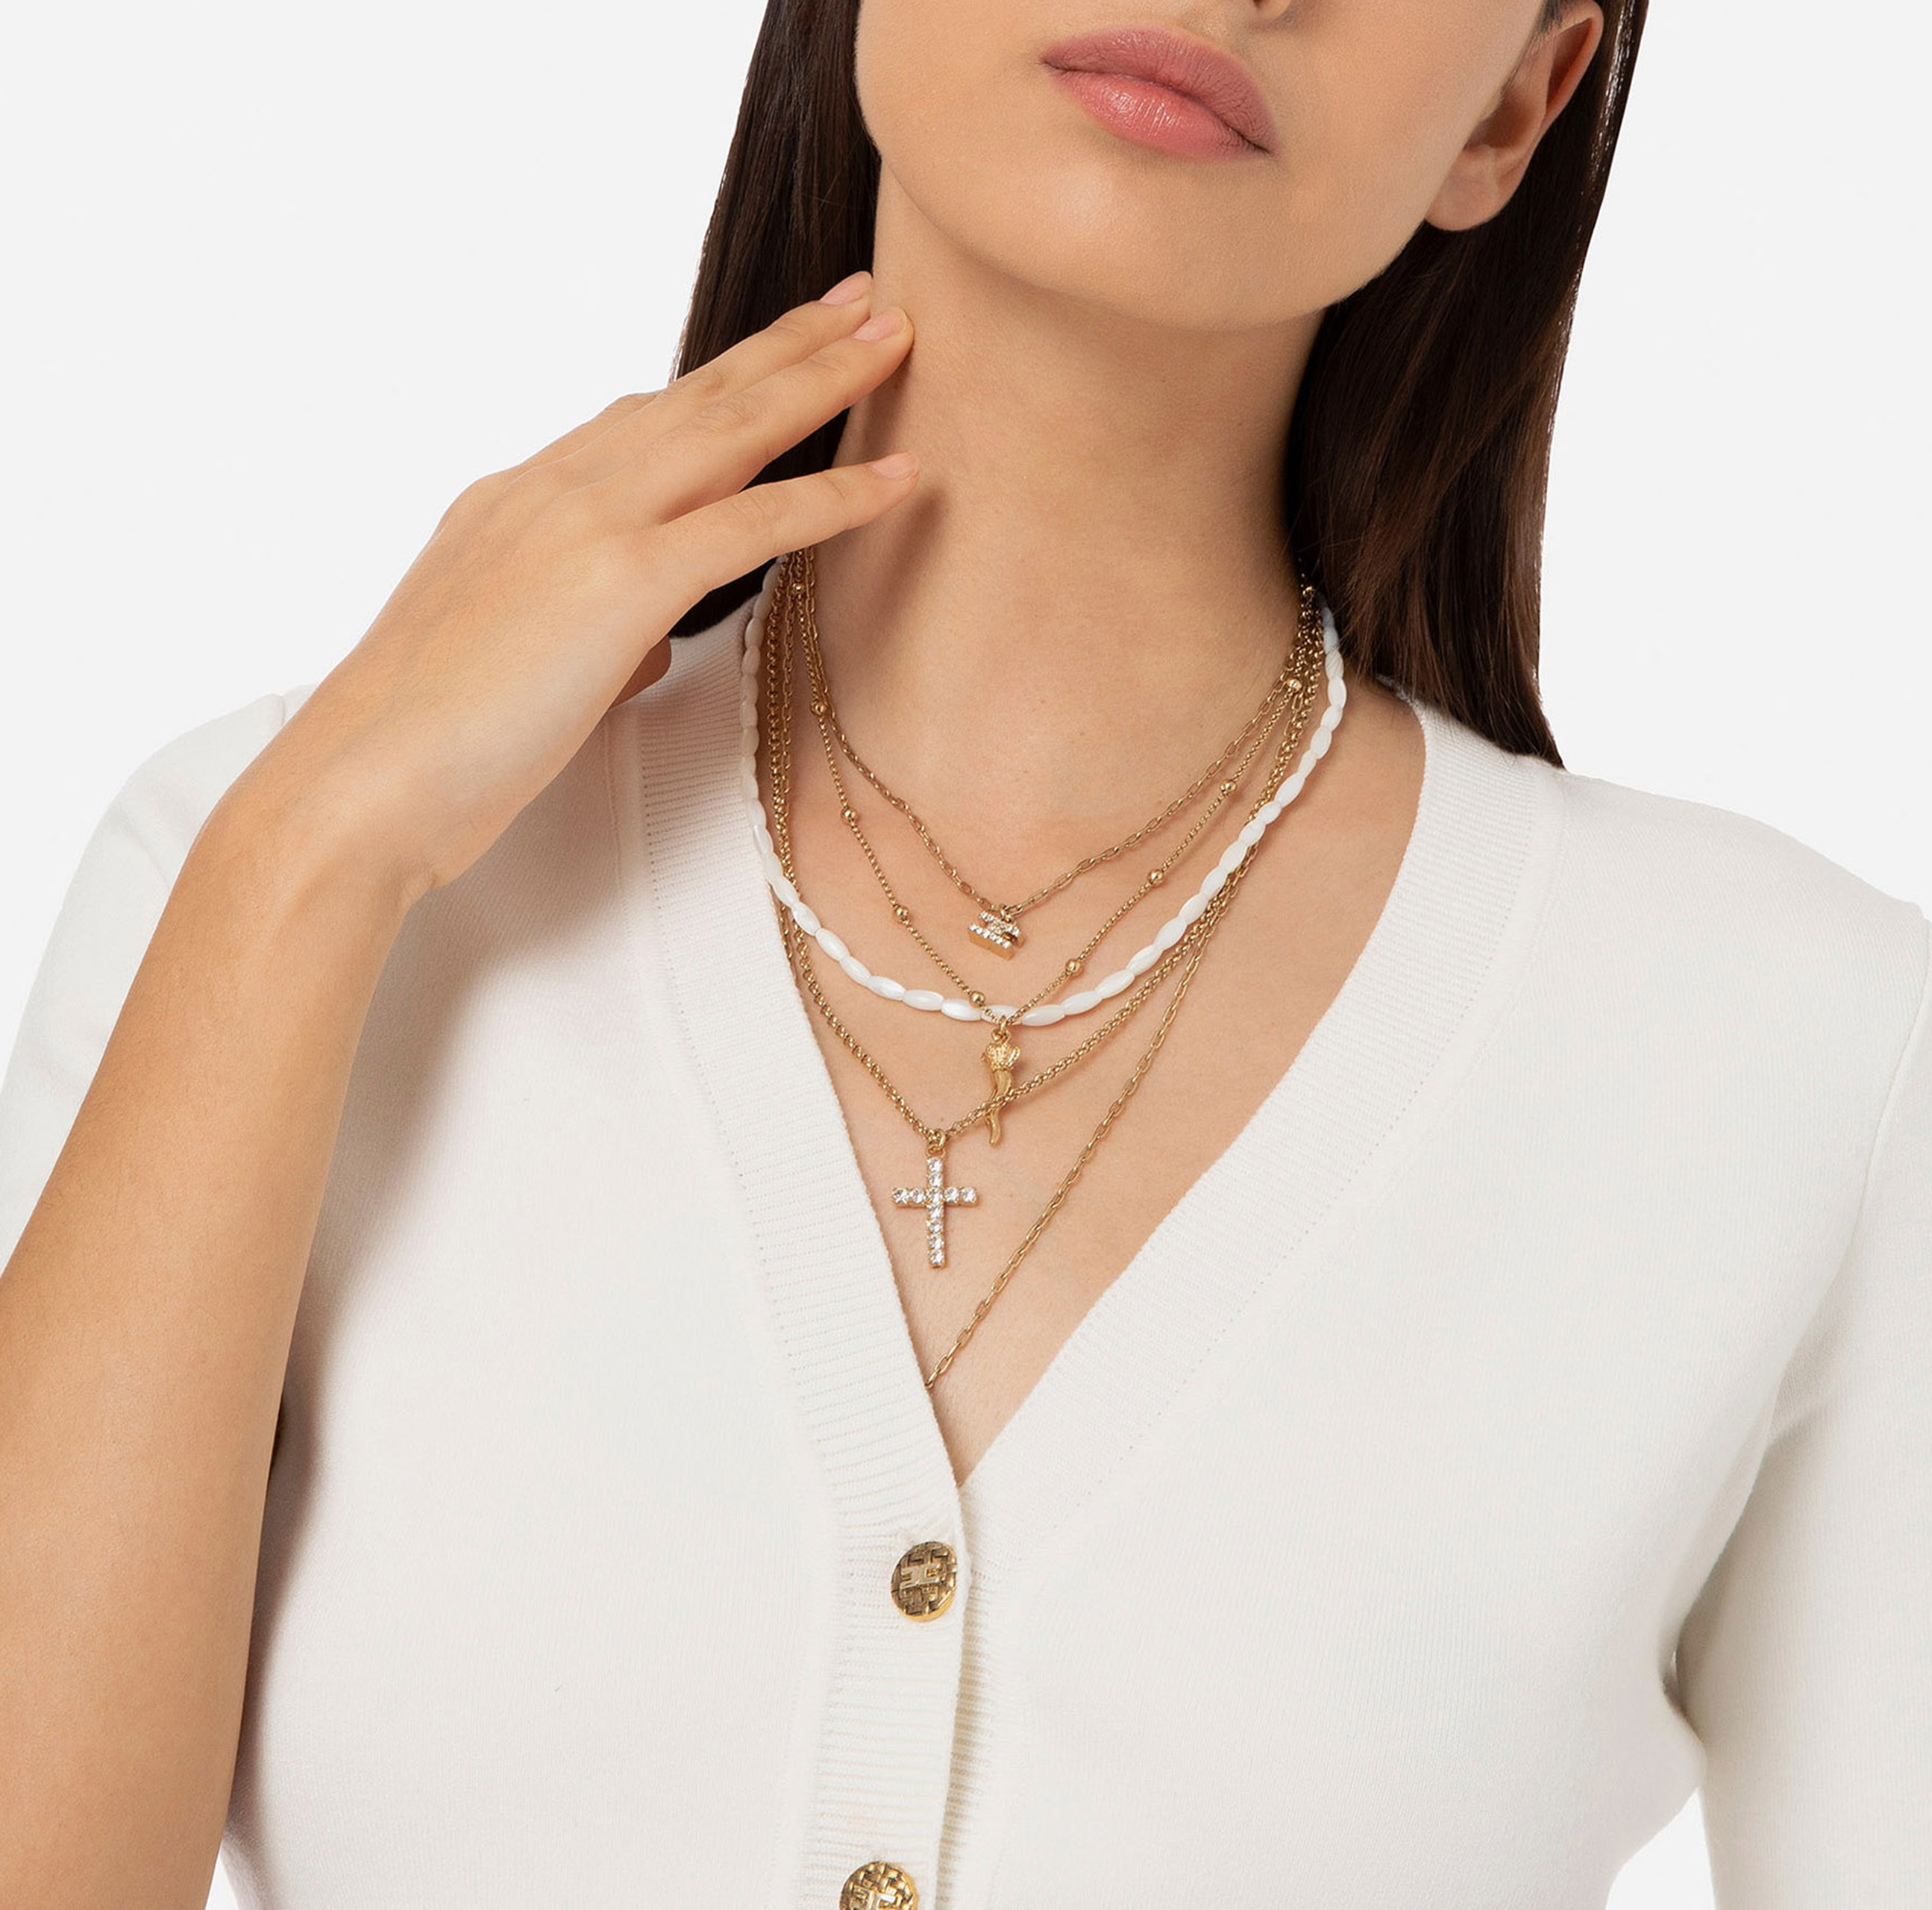 Choker necklace with chain and beads - Elisabetta Franchi